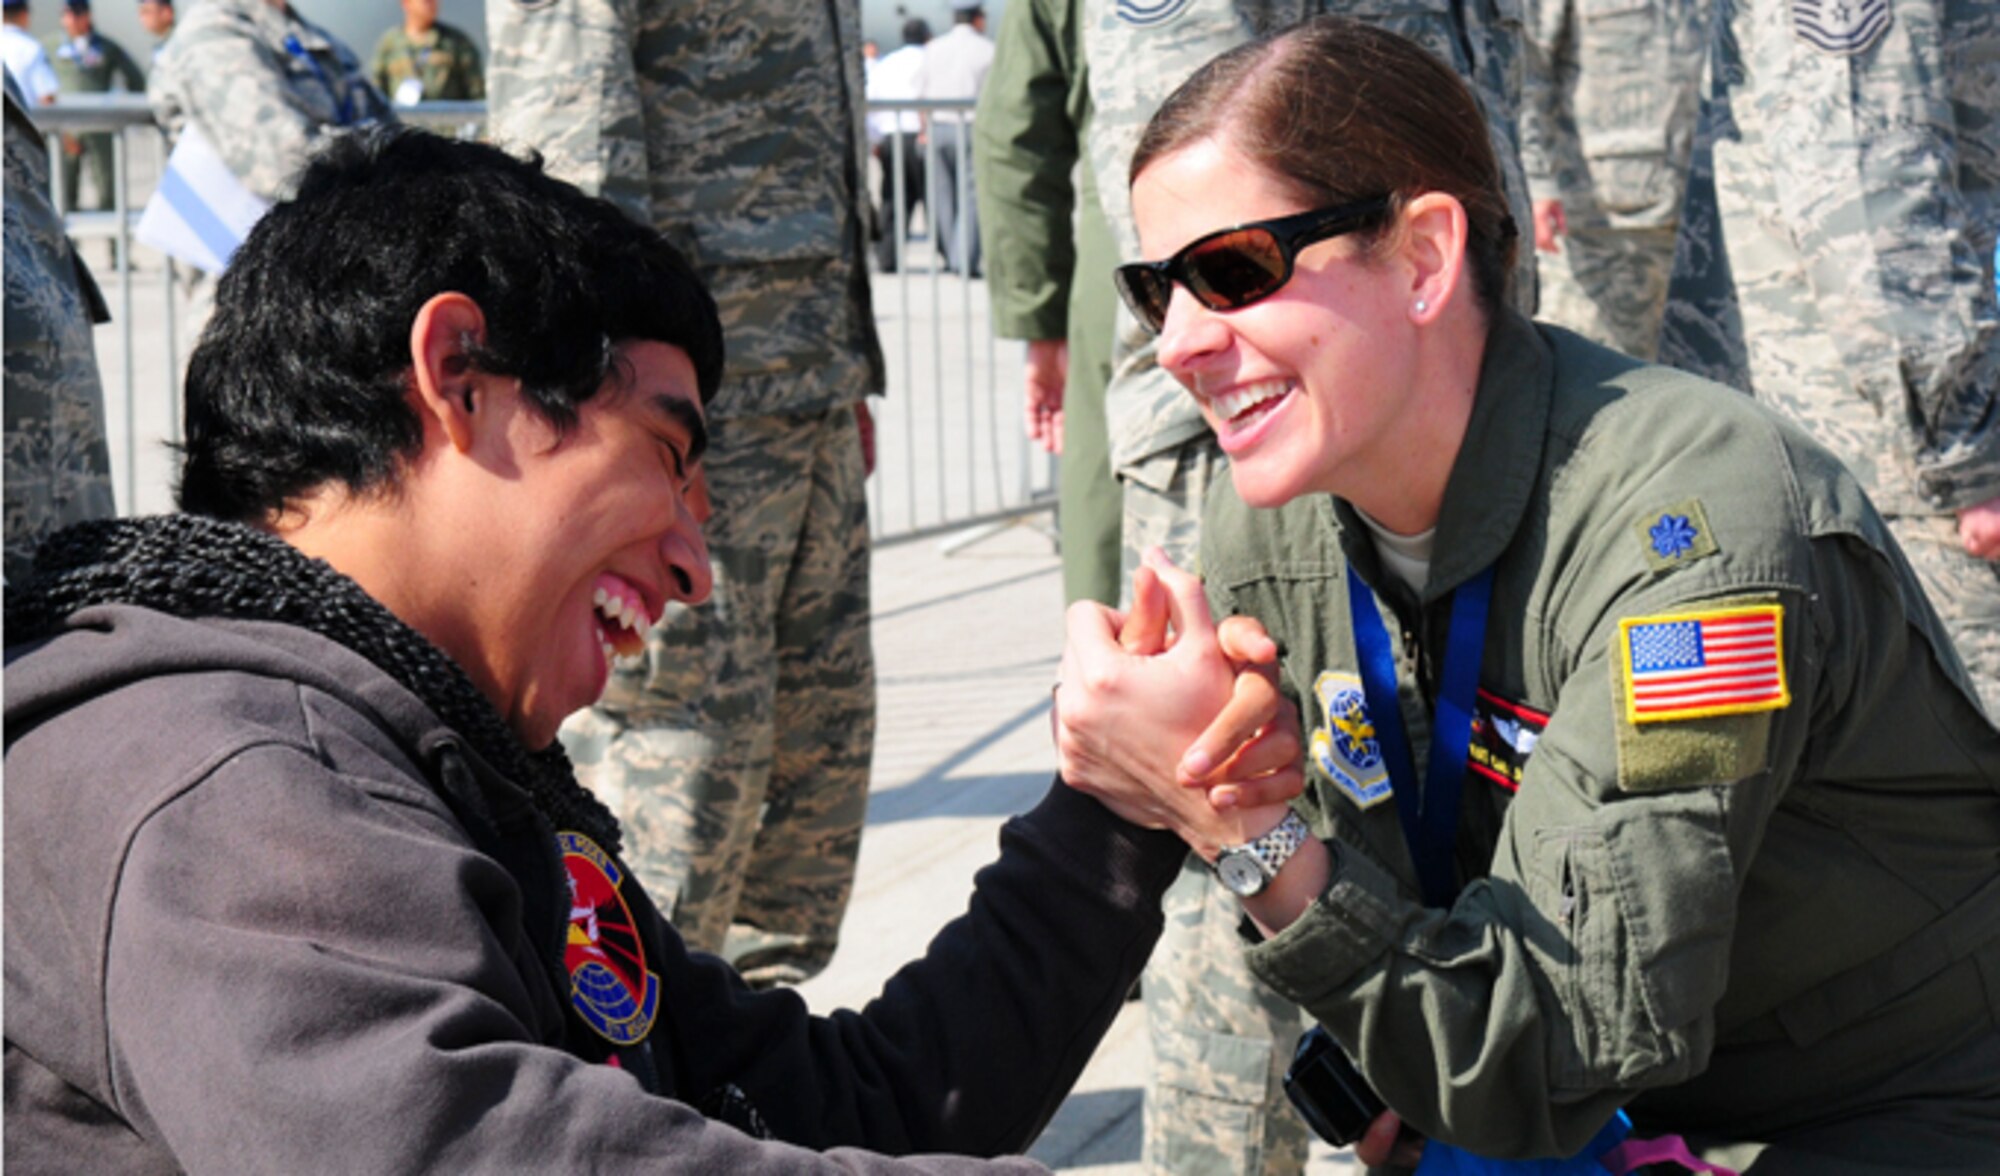 Lt. Col. Kat Callaghan spends time with a Chilean boy from the Teletón Foundation at the FIDAE Air Show in Santiago, Chile, March 26. Nearly 60 Airmen participate in subject matter expert exchanges with Chilean air force counterparts during FIDAE, and as part of the events are hosting static displays of the C-130 Hercules and F-16. Airmen from the Texas Air National Guard set aside time to host the children before the public days of FIDAE, which are scheduled for the weekend. Callaghan is the 571st Mobility Support Advisory Squadron director of operations. (U.S. Air Force photo/Senior Master Sgt. Miguel Arellano)